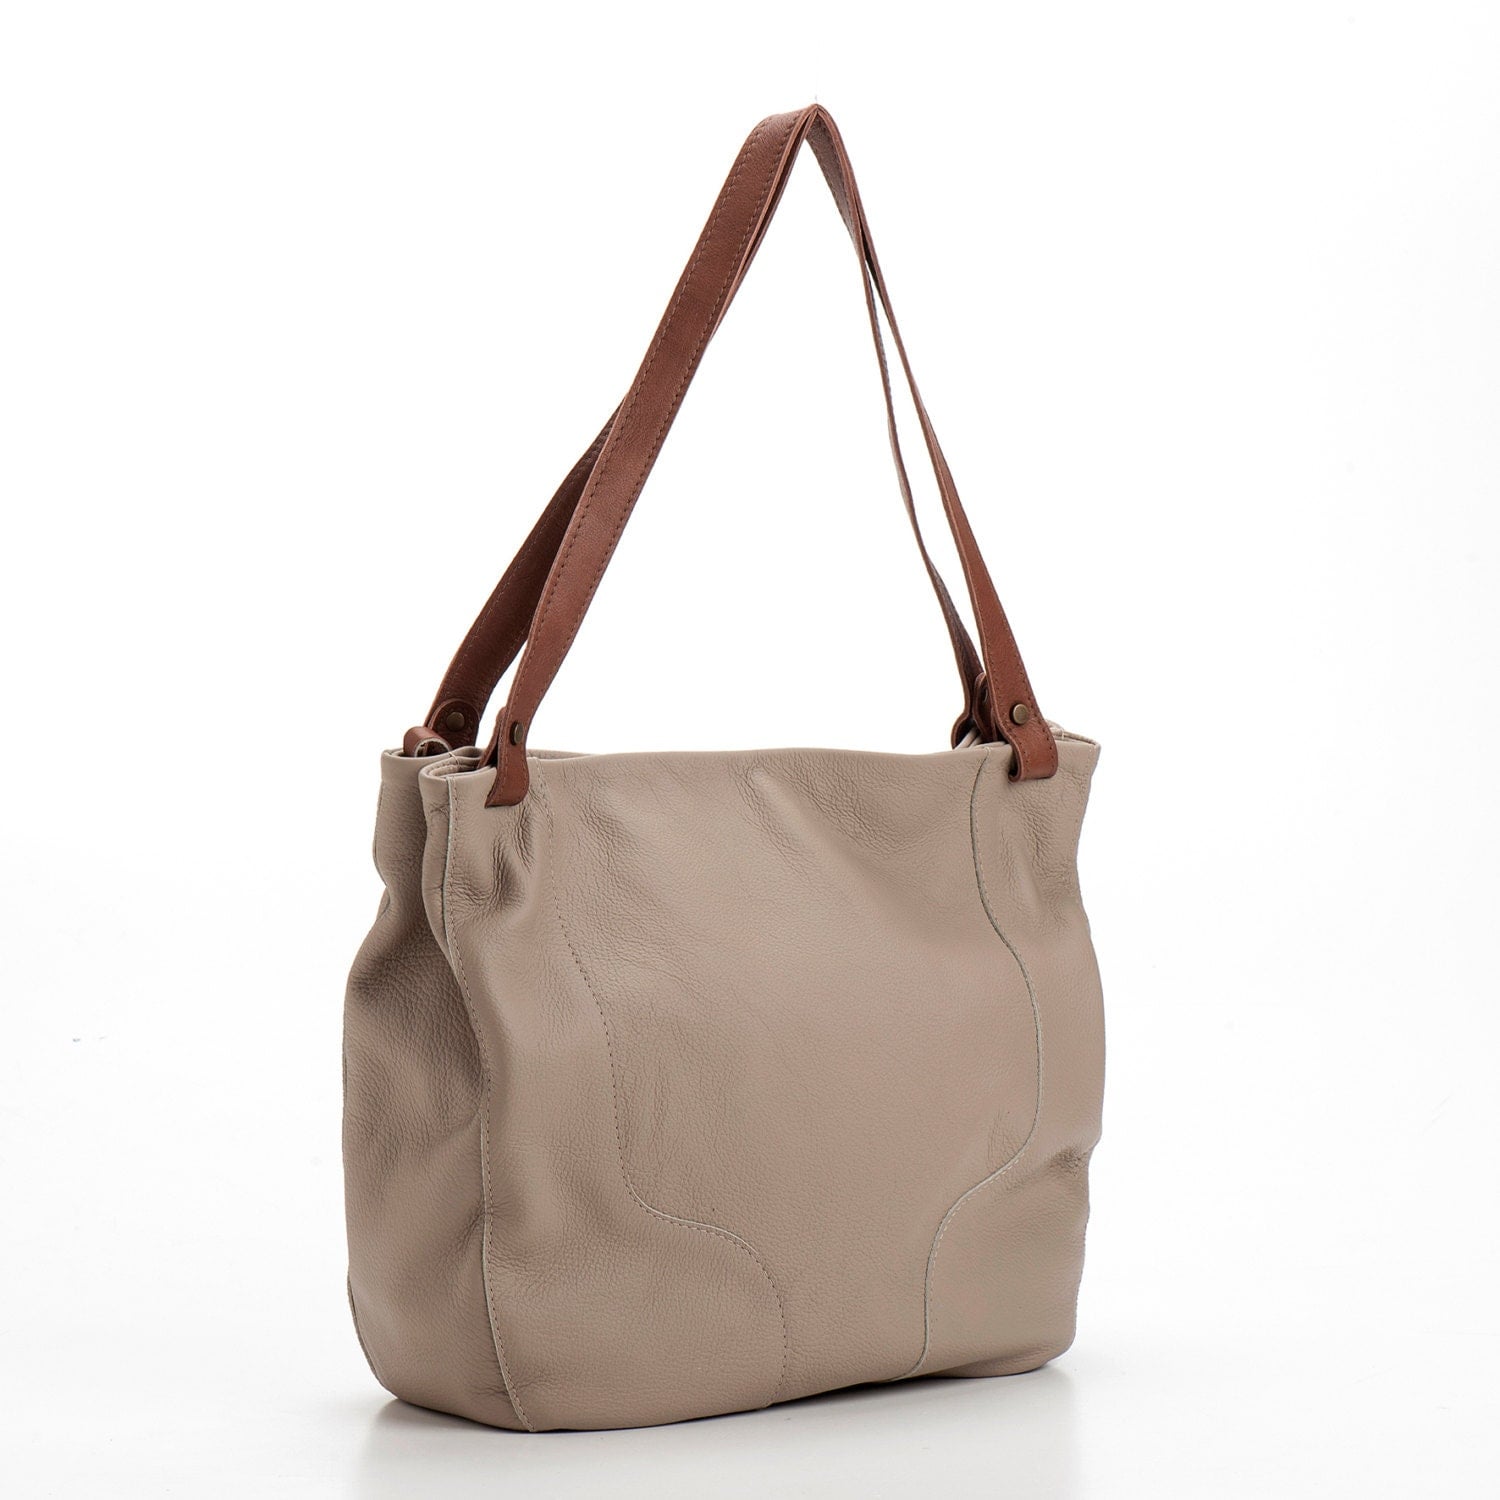 Clearance Sale Taupe leather tote bag with by MeravSegevBags